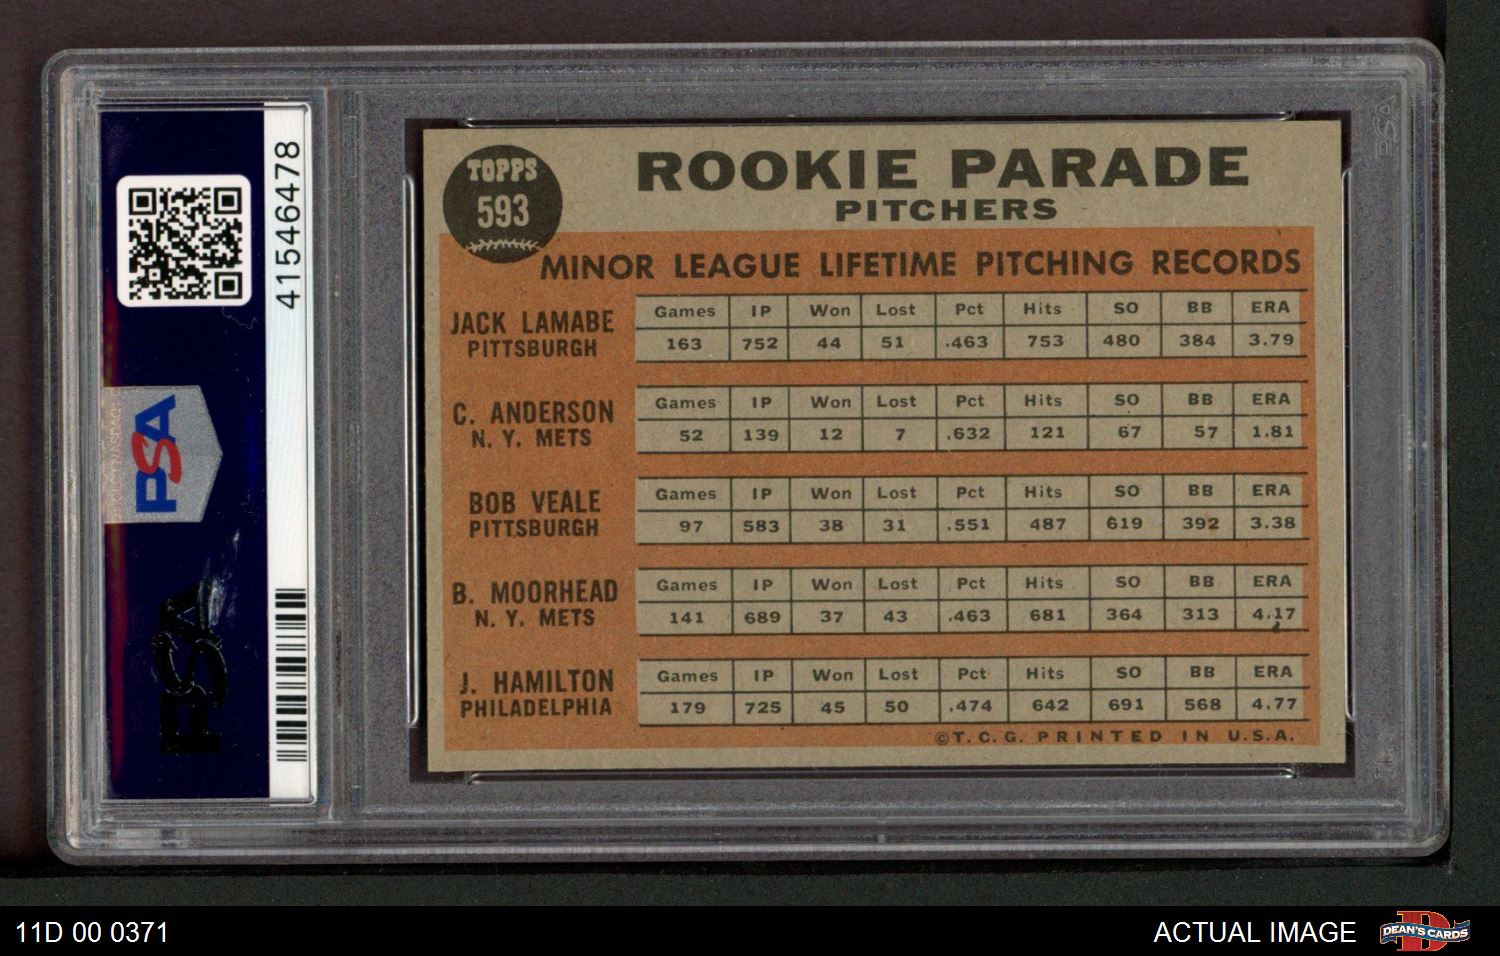 Card of the Day: 1962 Topps Rookie Parade Pitchers, Bob Veale/Jack